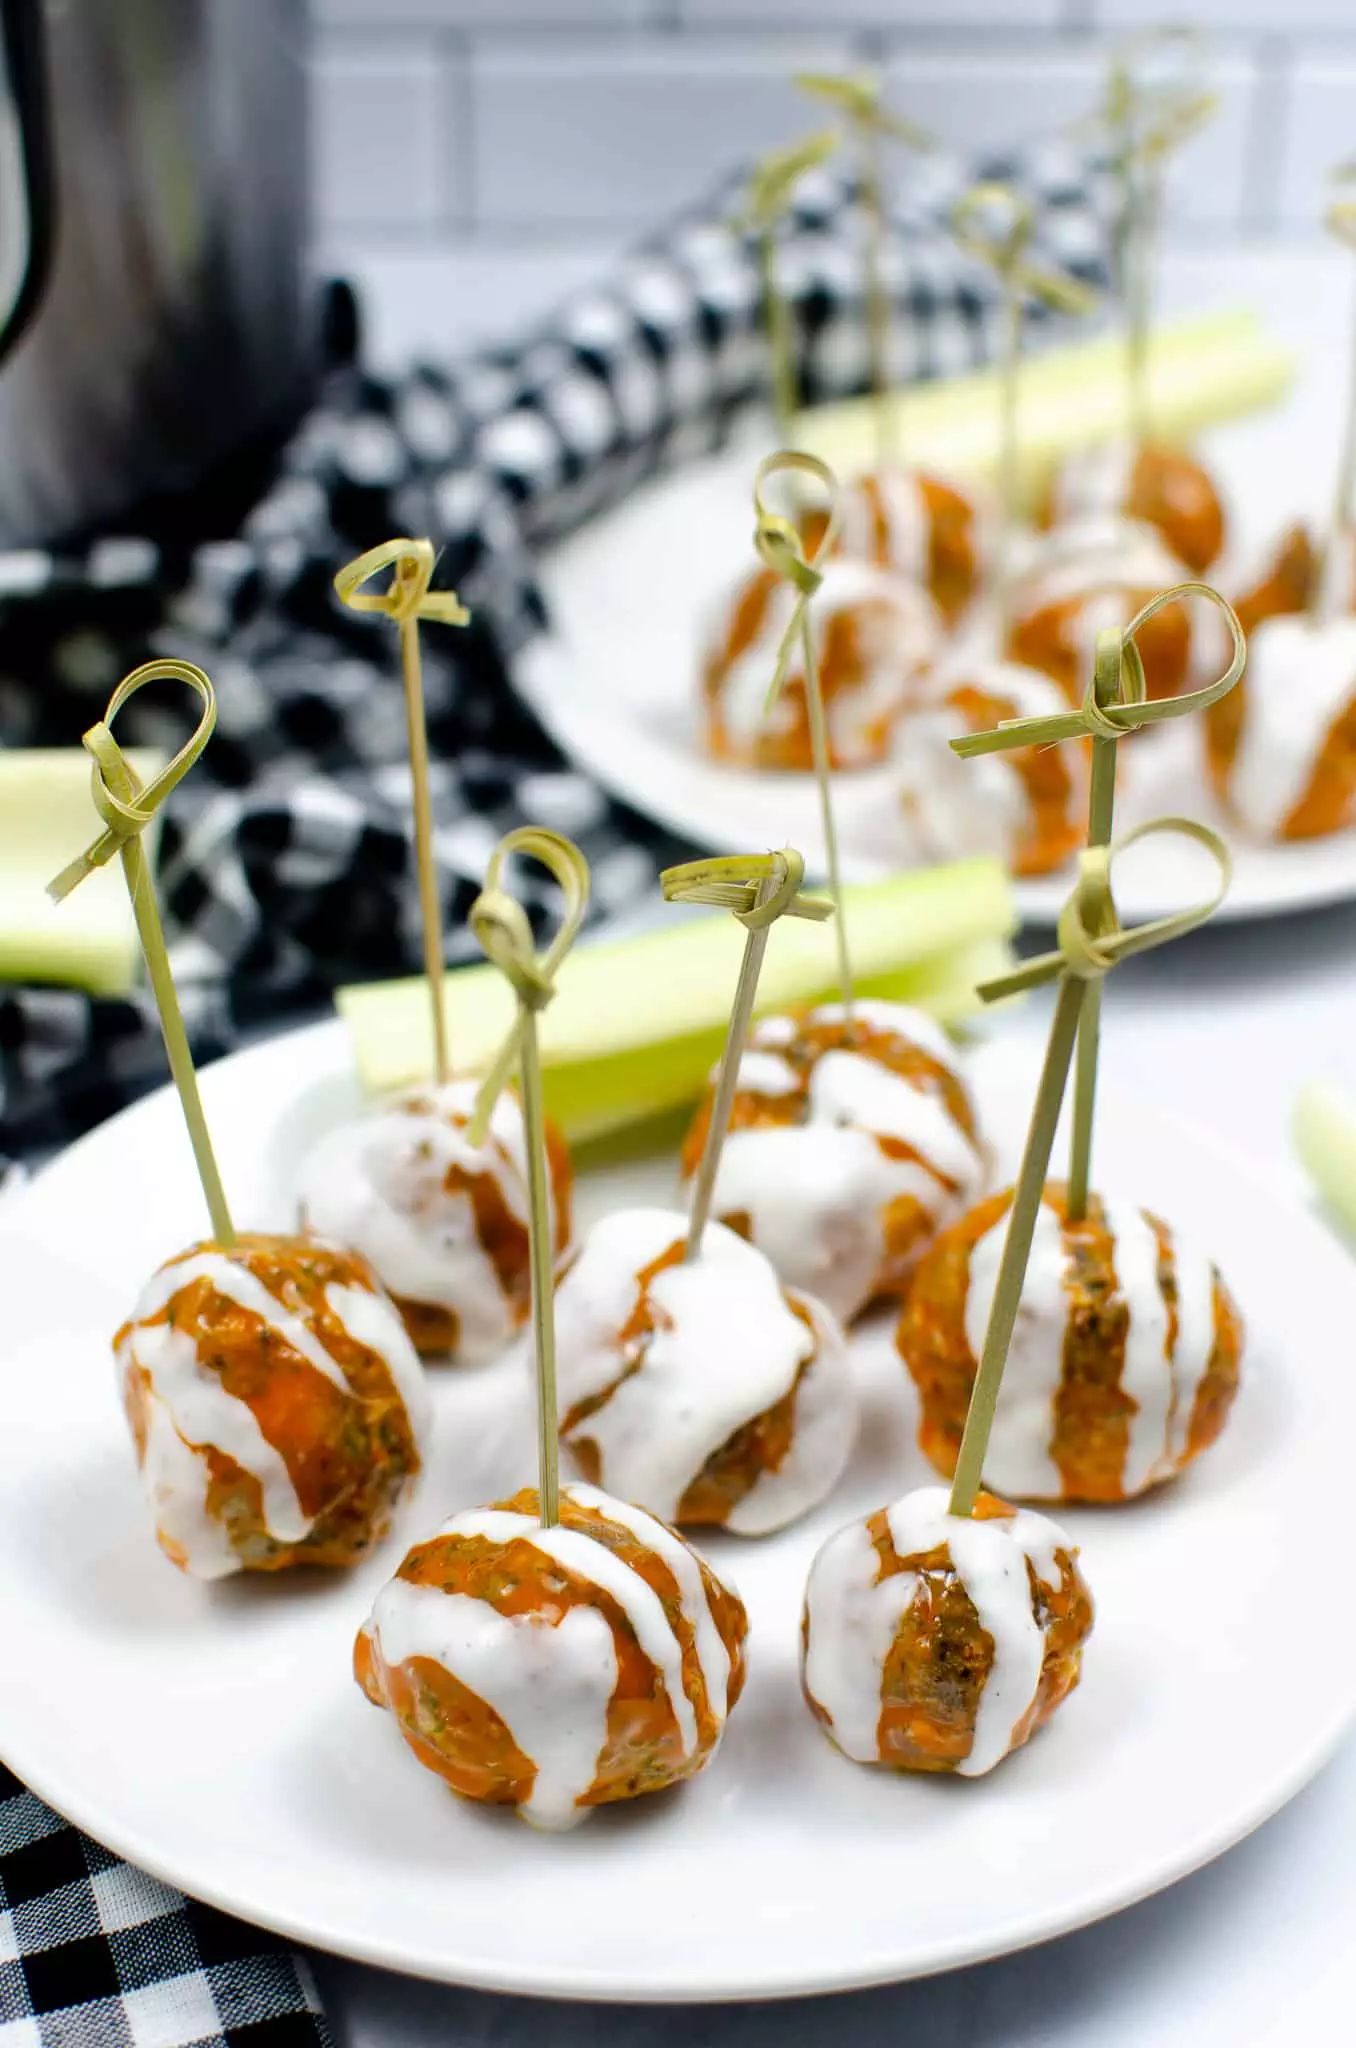 buffalo chicken meatballs with toothpicks as appetizers